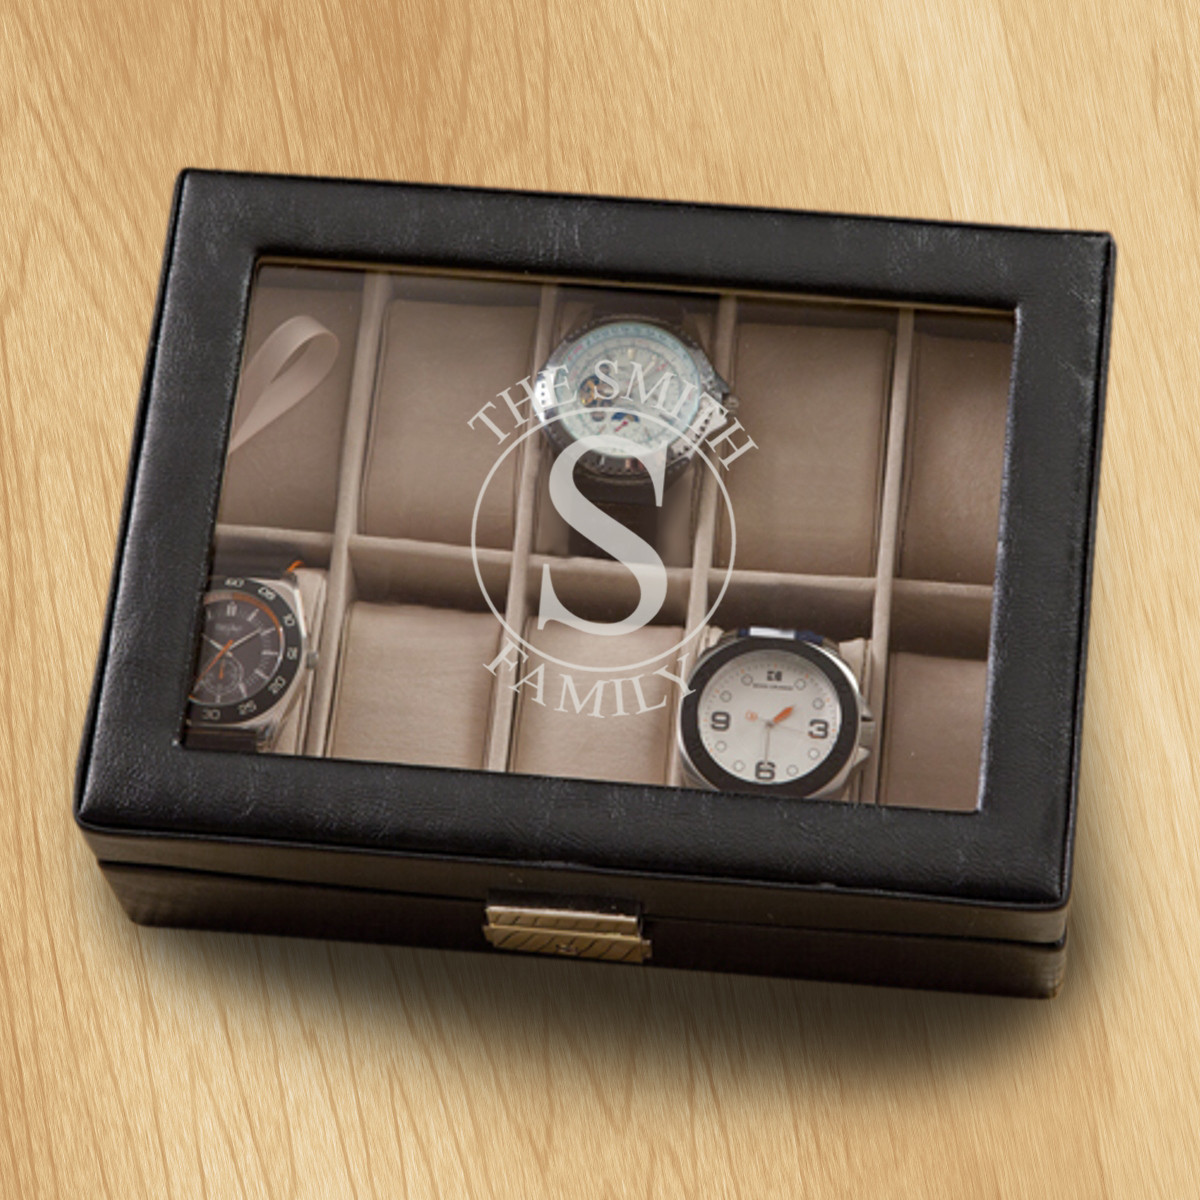 This leather case with glass lid can hold multiple wristwatches conveniently in its neatly sectioned compartments. Customize for added grace. Keep your wristwatches neatly organized in this monogram watch box to give them luxurious storage. The rectangul #luxury